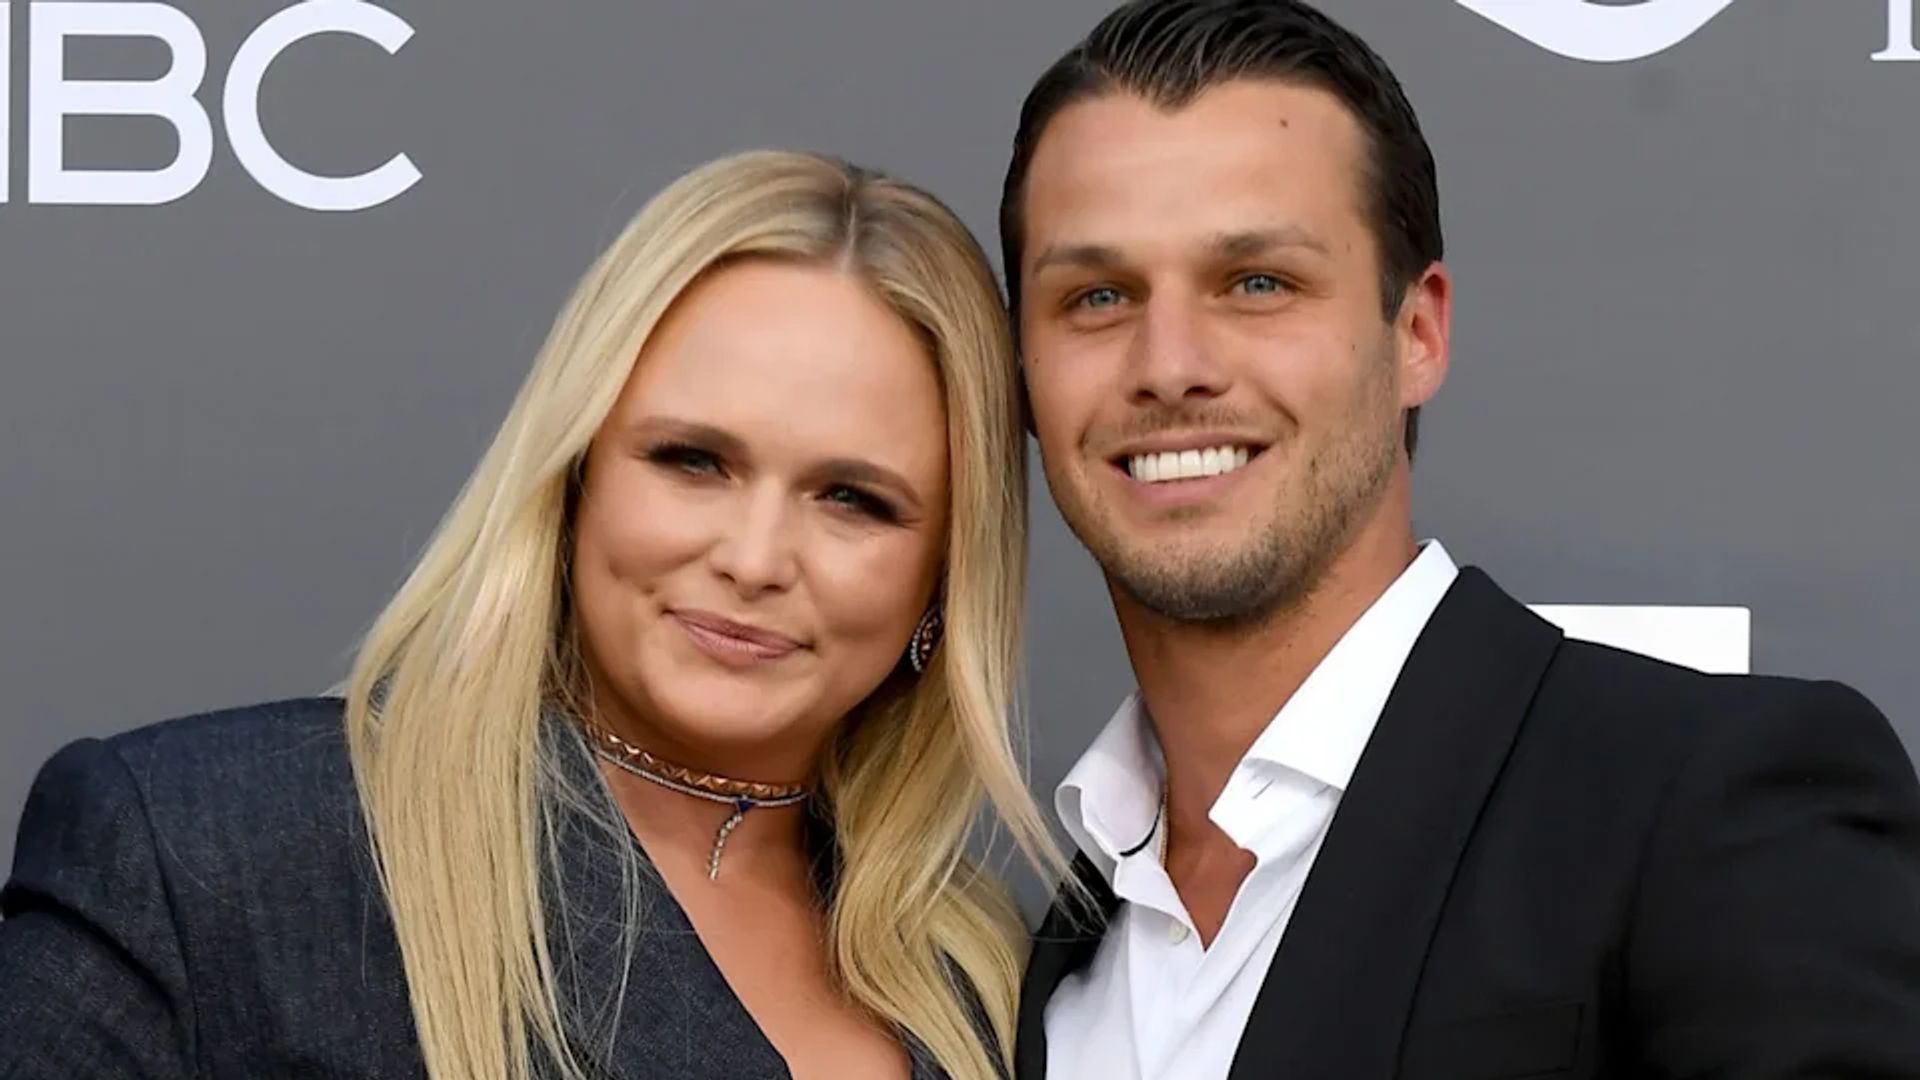 Miranda Lambert reunited with rarely-seen stepson as she returns home with husband - see photos